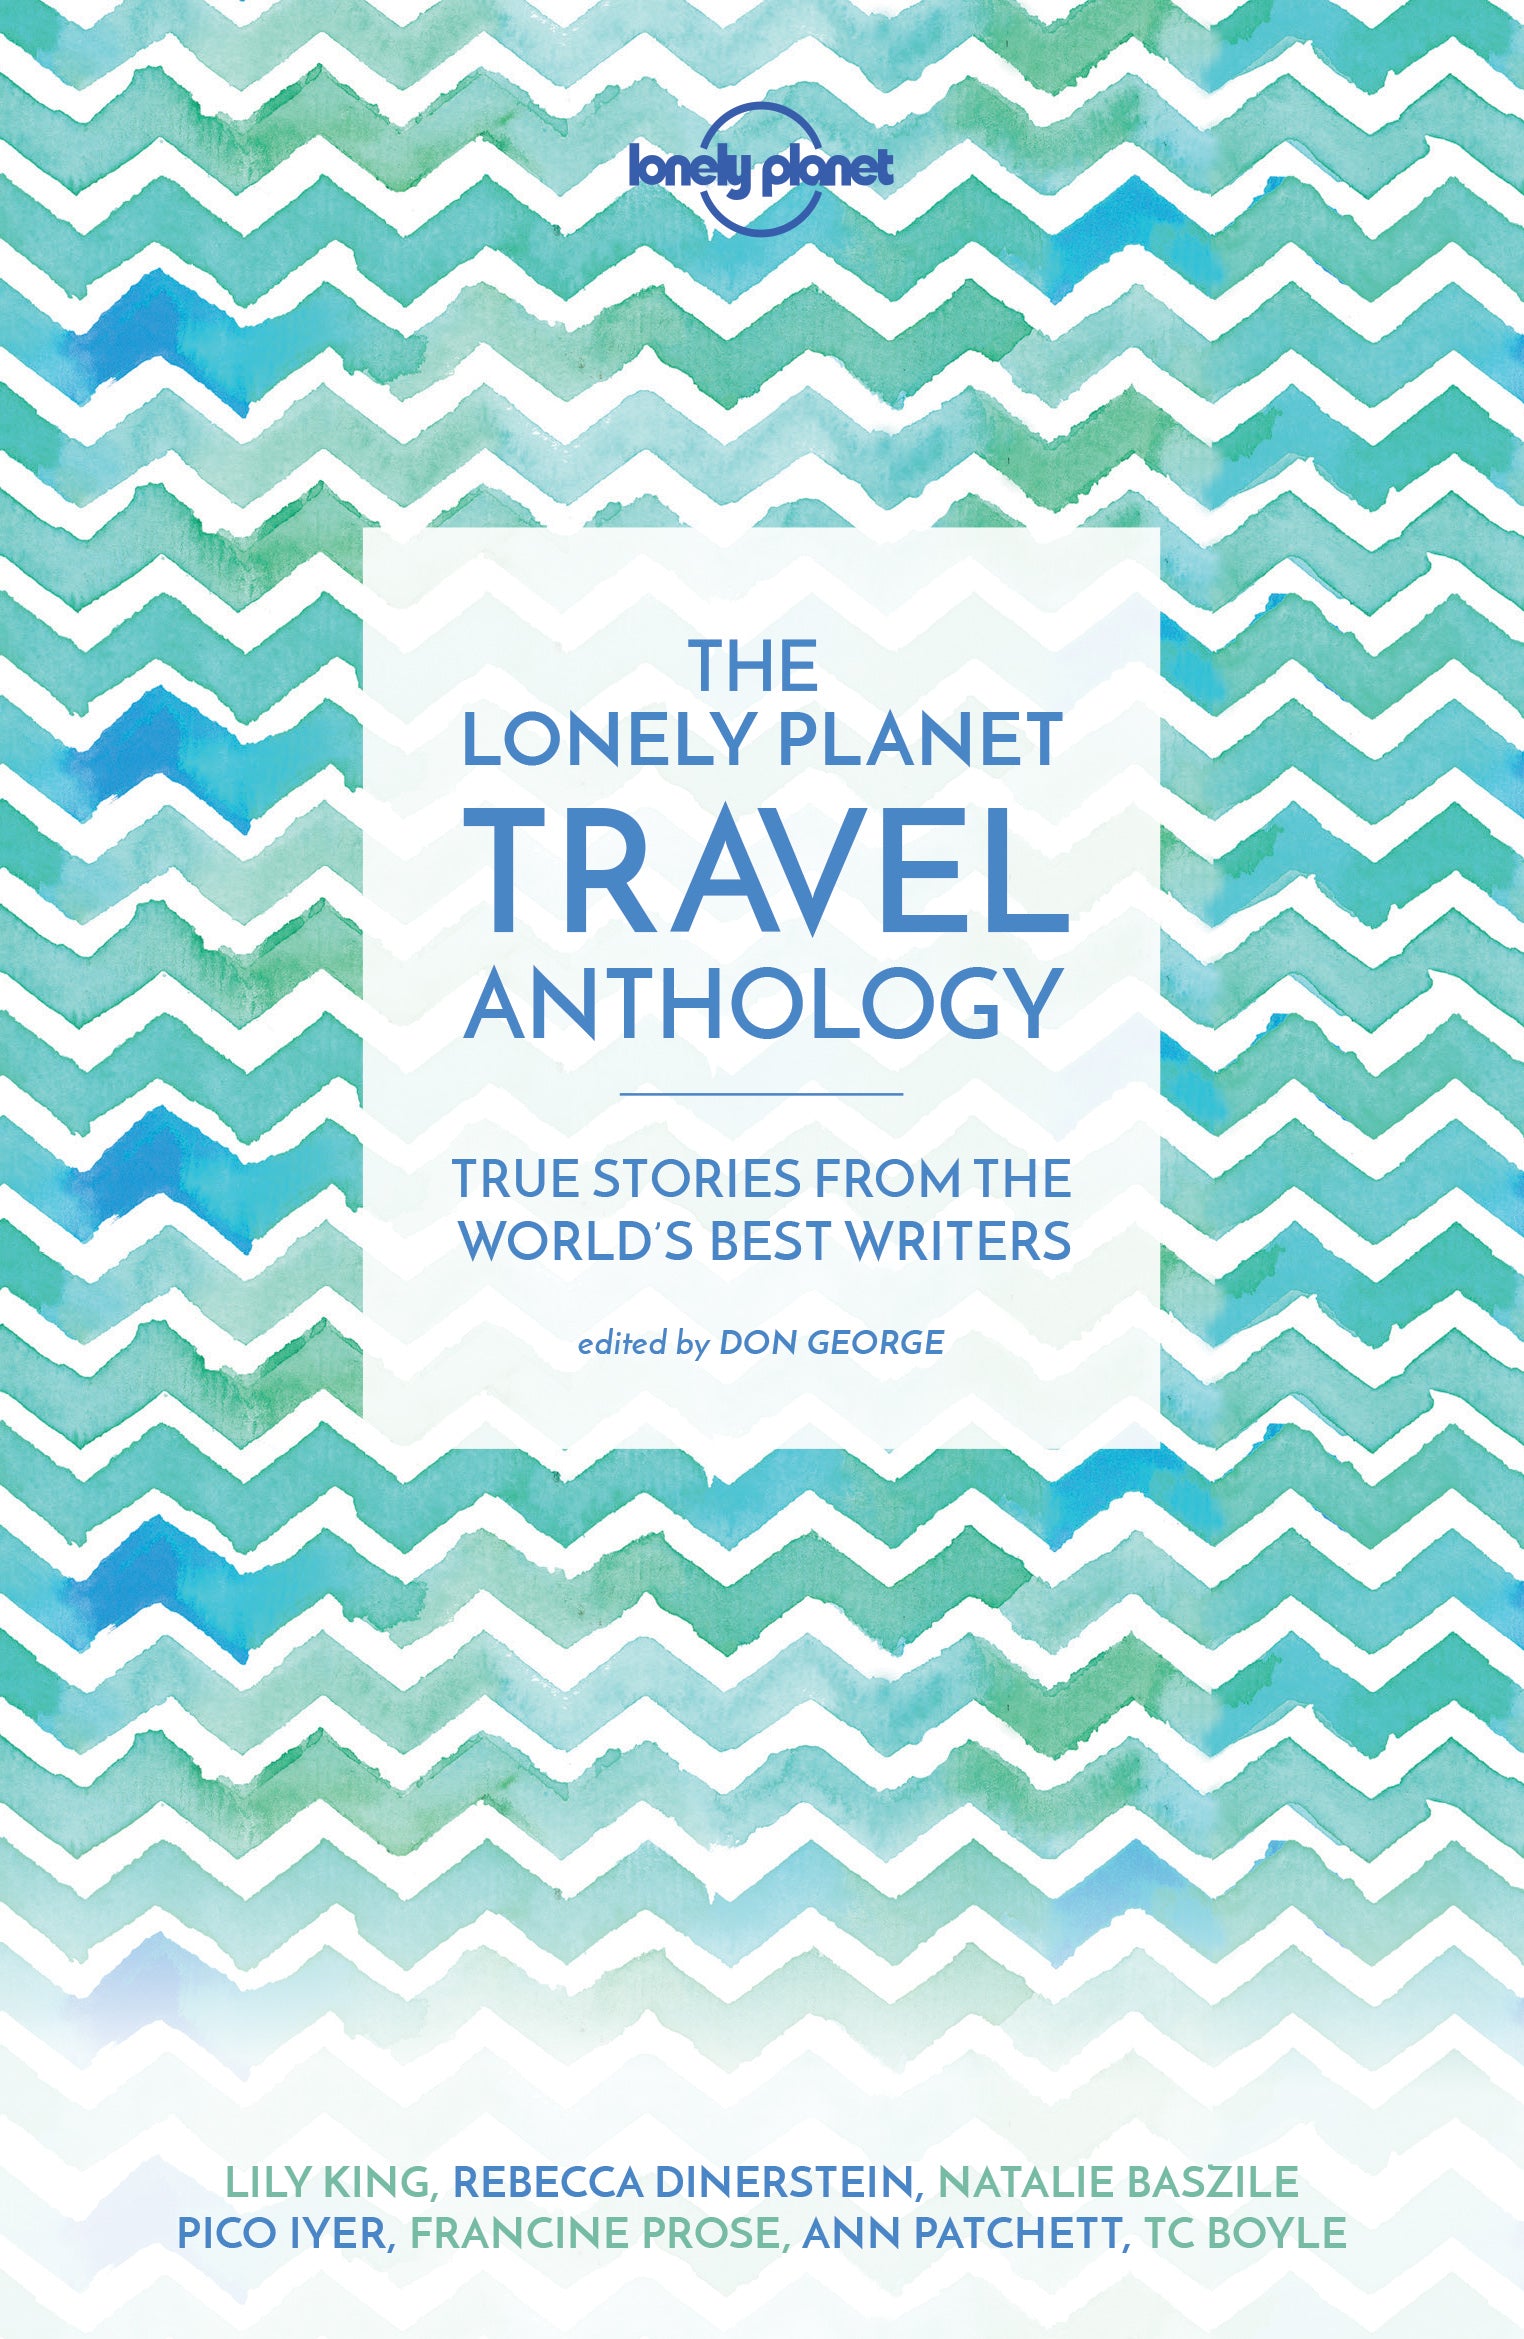 The Lonely Planet Travel Anthology (paperback)